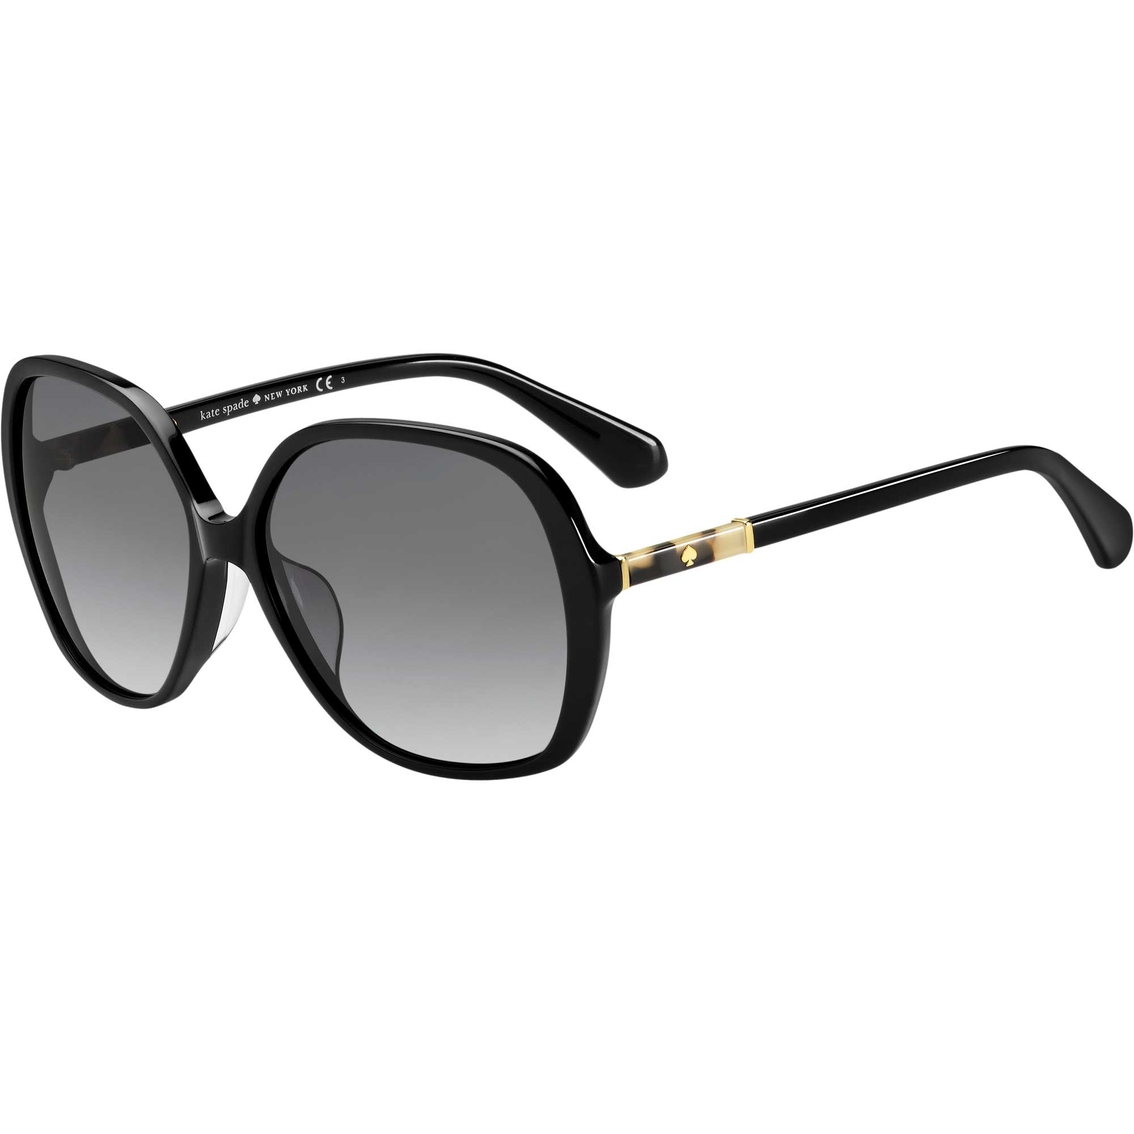 Kate Spade Atalina Square Sunglasses Atalinafs 0wr79o | Women's Sunglasses  | Clothing & Accessories | Shop The Exchange